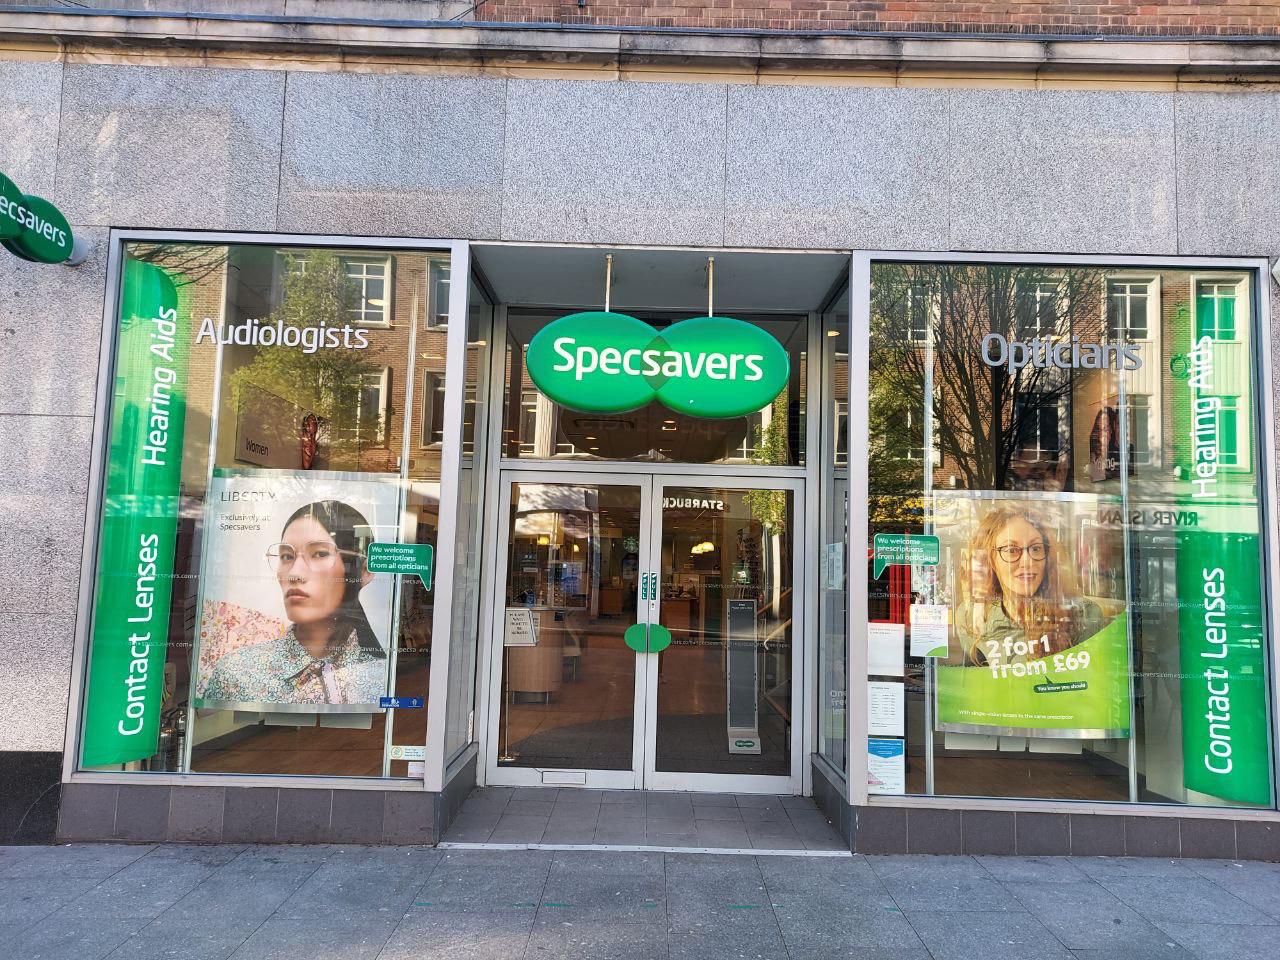 Exeter Specsavers Specsavers Opticians and Audiologists - Exeter Exeter 01392 210604